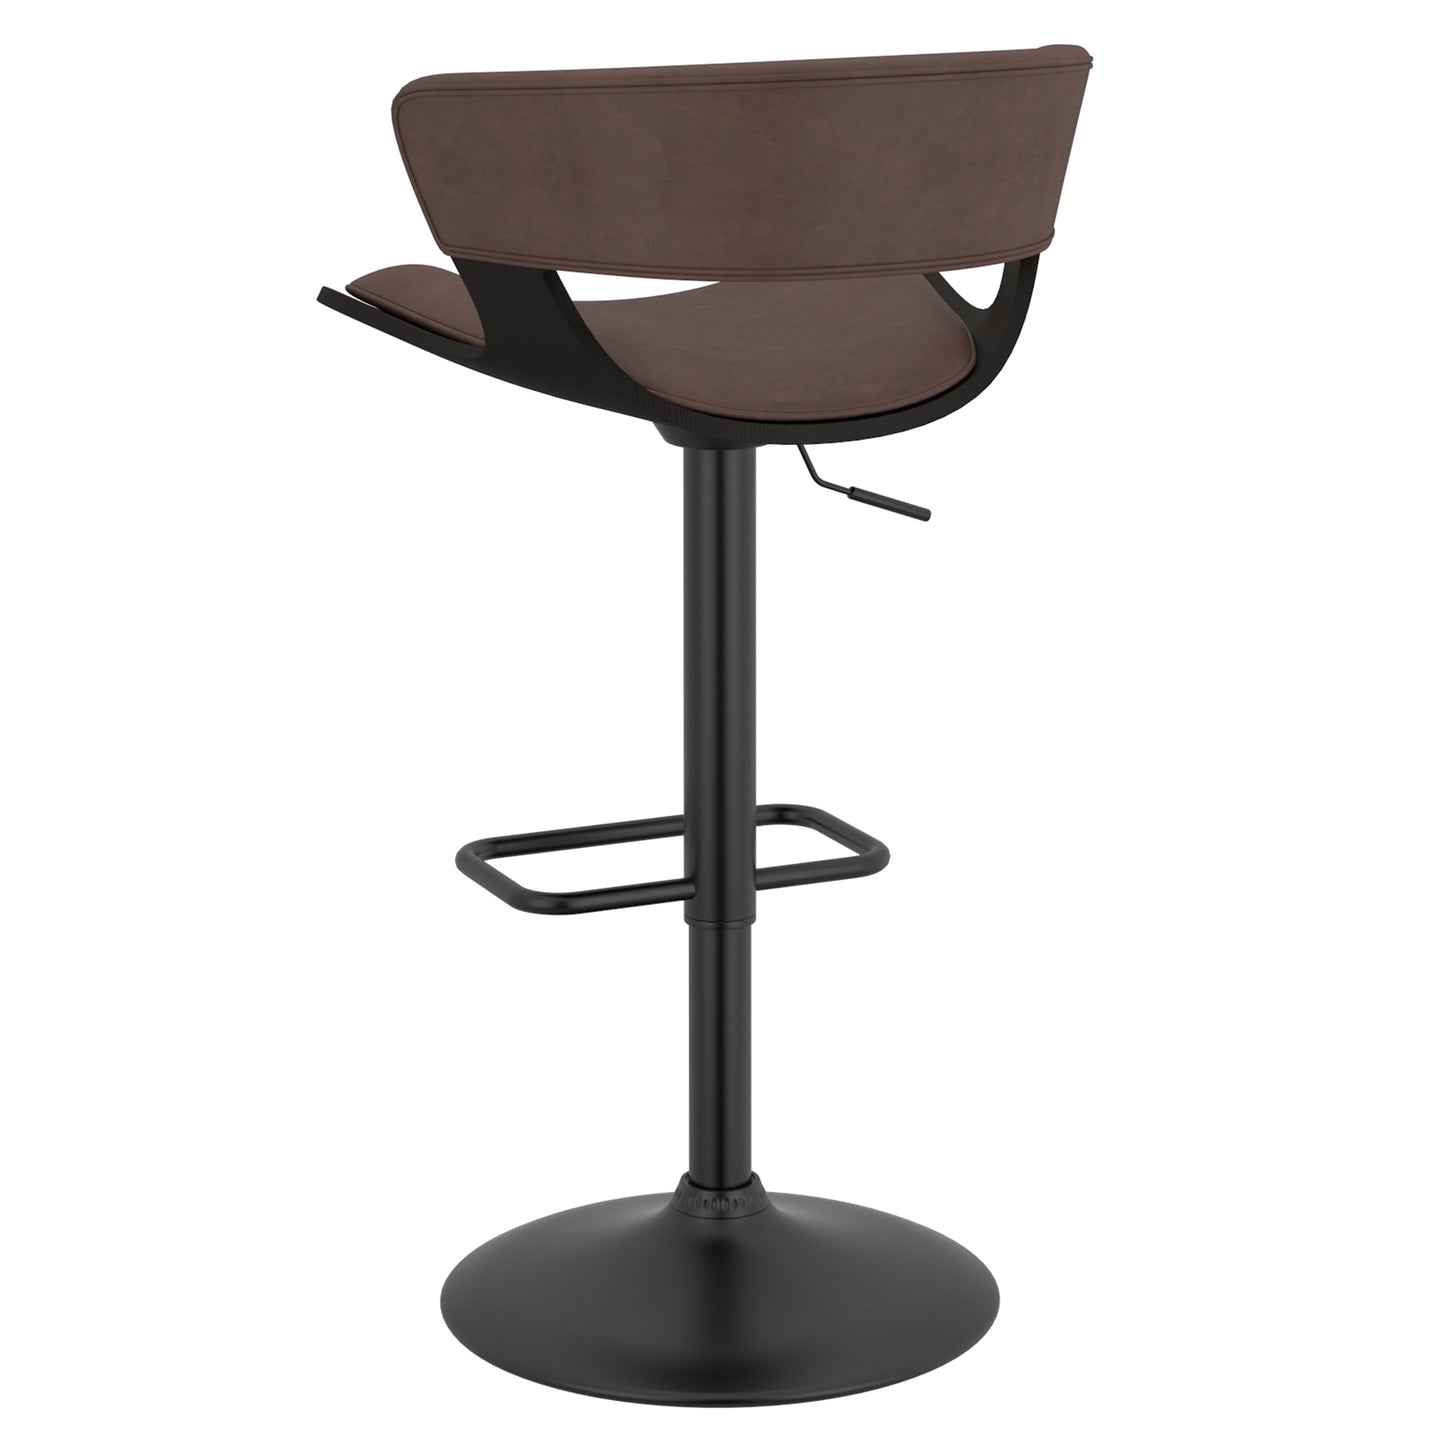 Rover Adjustable Air Lift Stool in Brown and Black